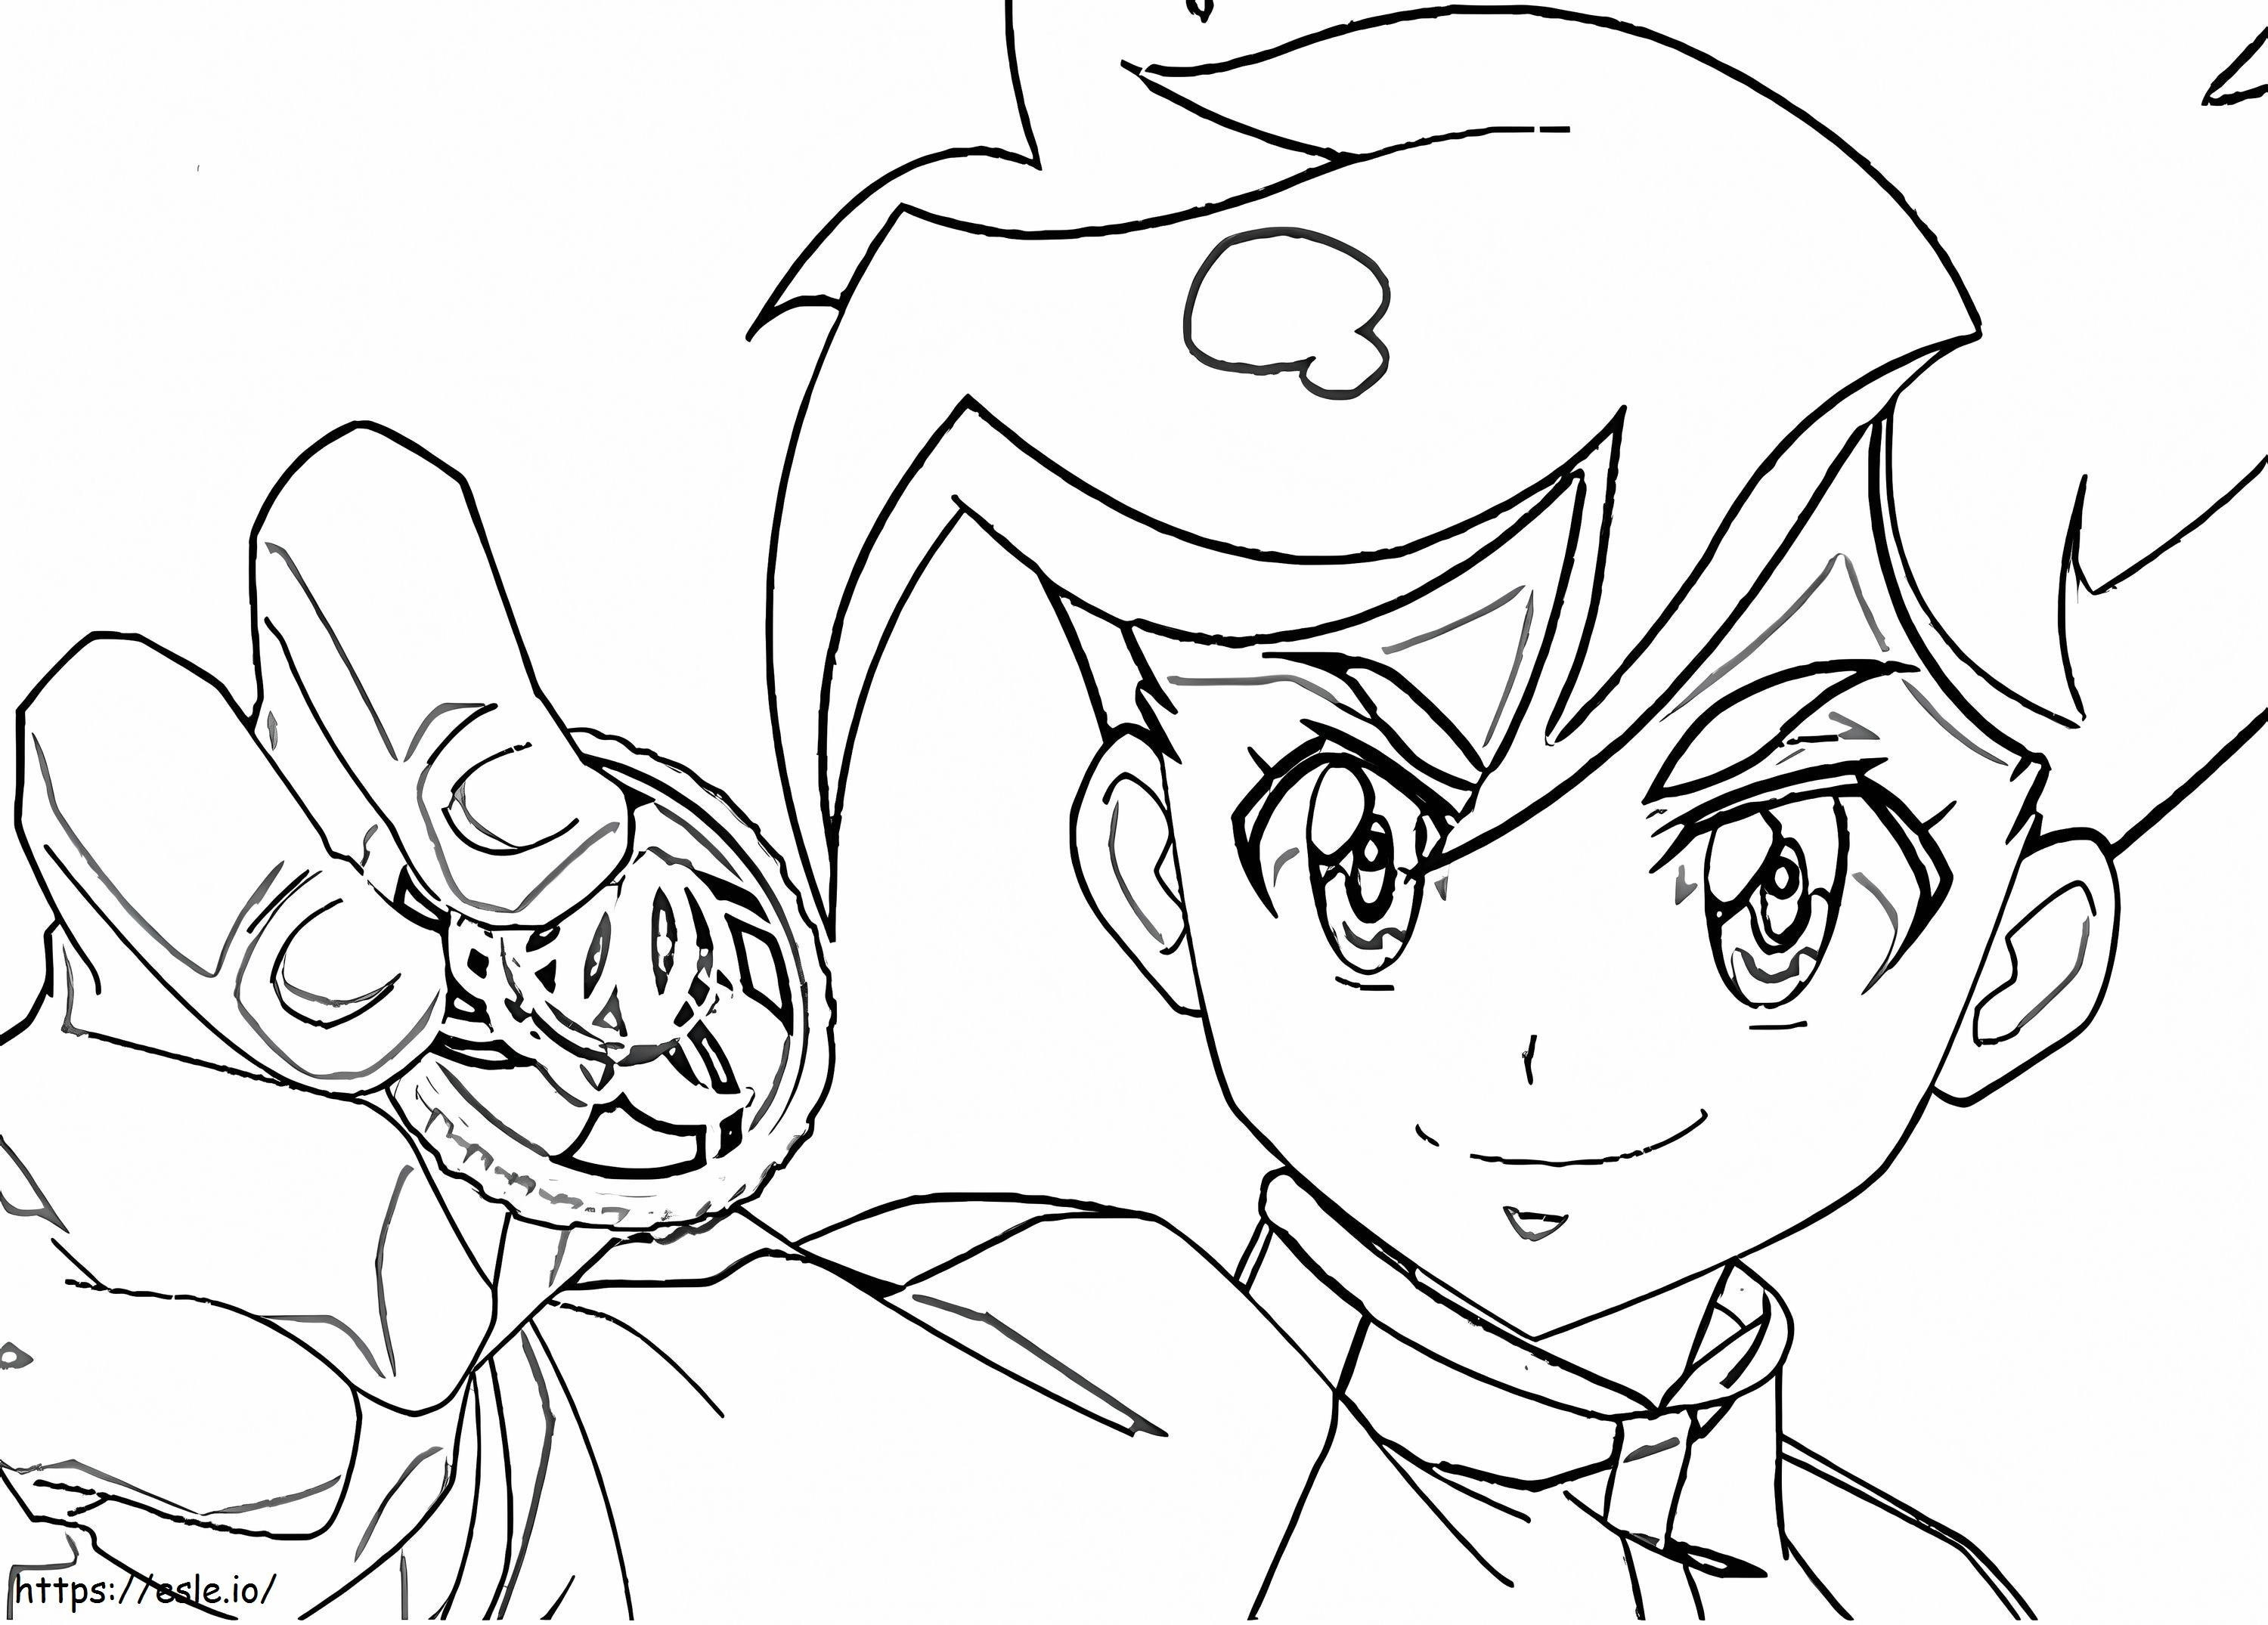 Xander From Screechers Wild coloring page